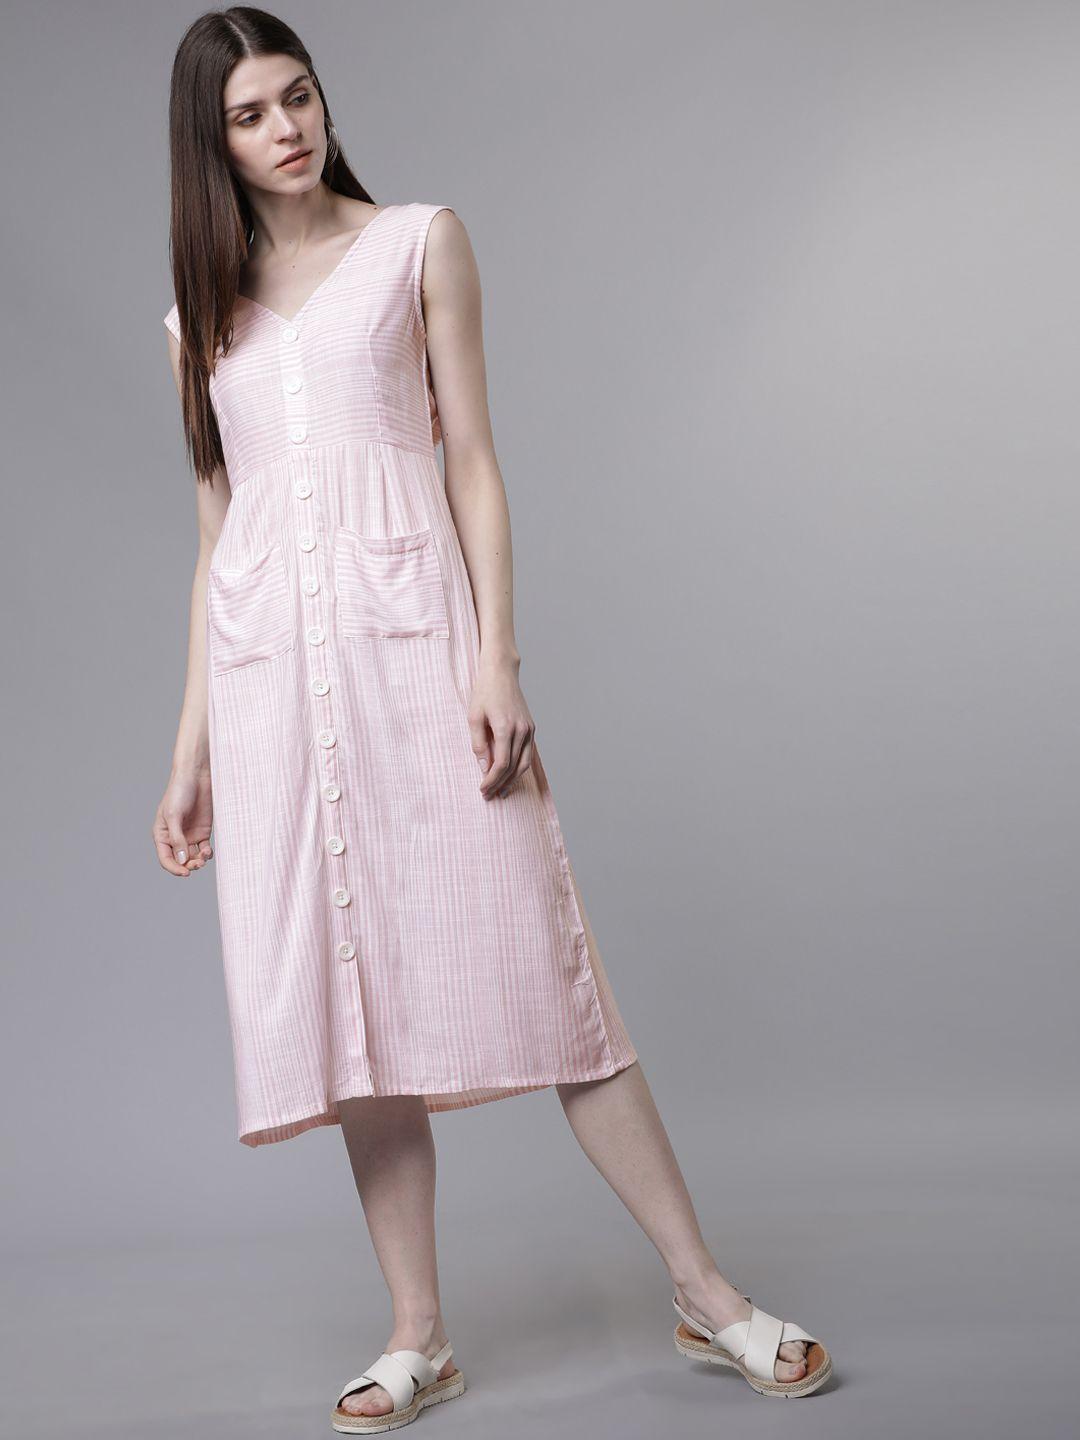 tokyo talkies women pink & white striped fit and flare dress